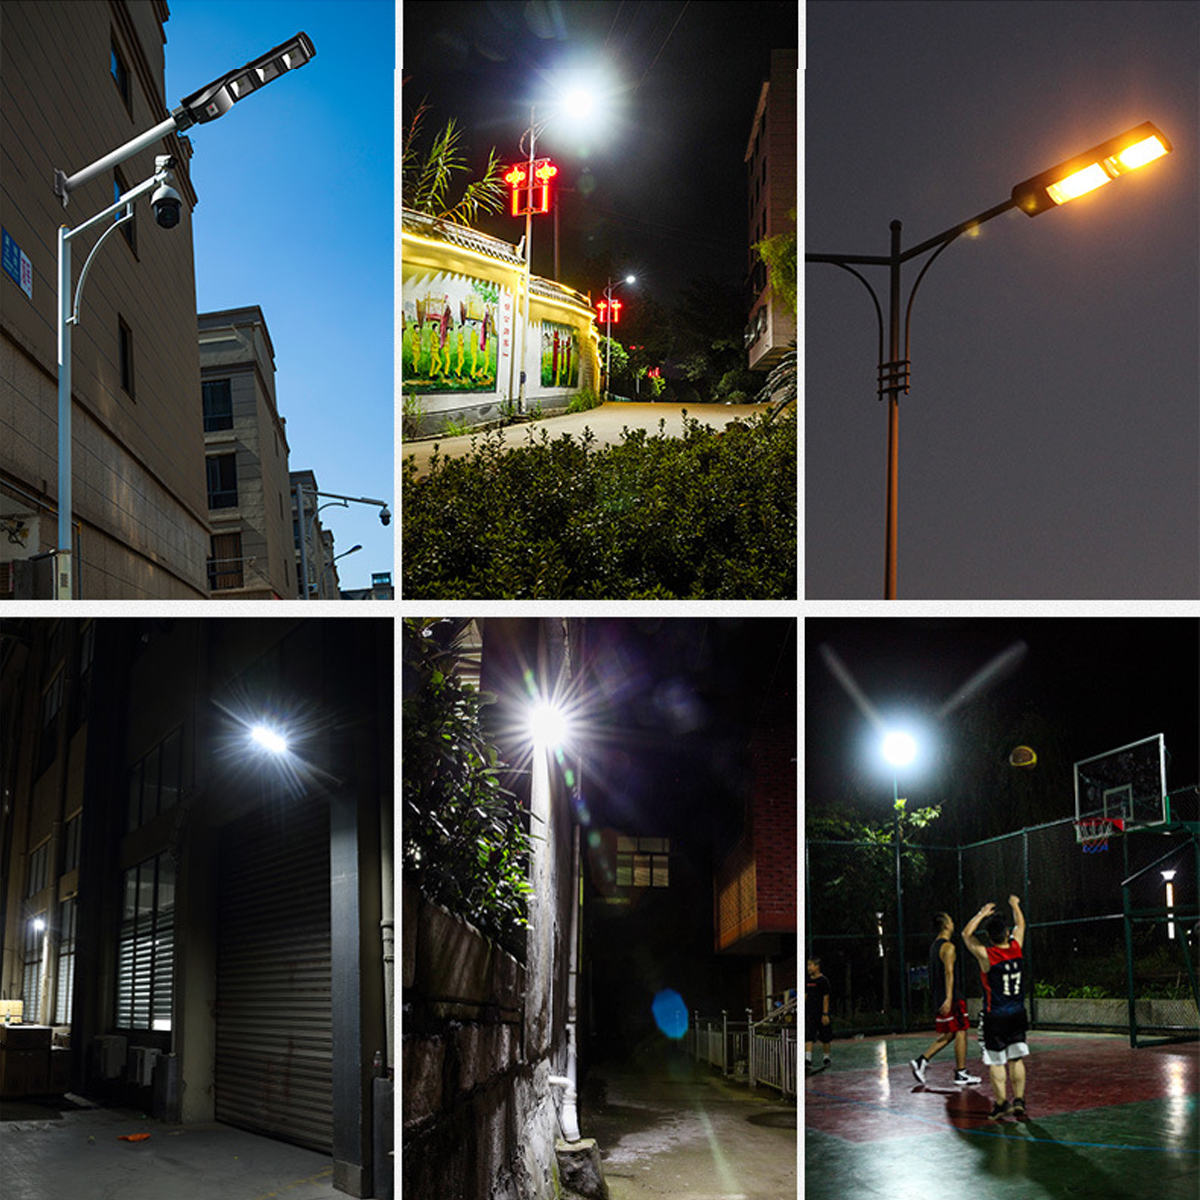 250450800W-Solar-LED-Cool-White-Street-Light-Waterproof-Outdoor-Lamp-w-Remote-1758789-4